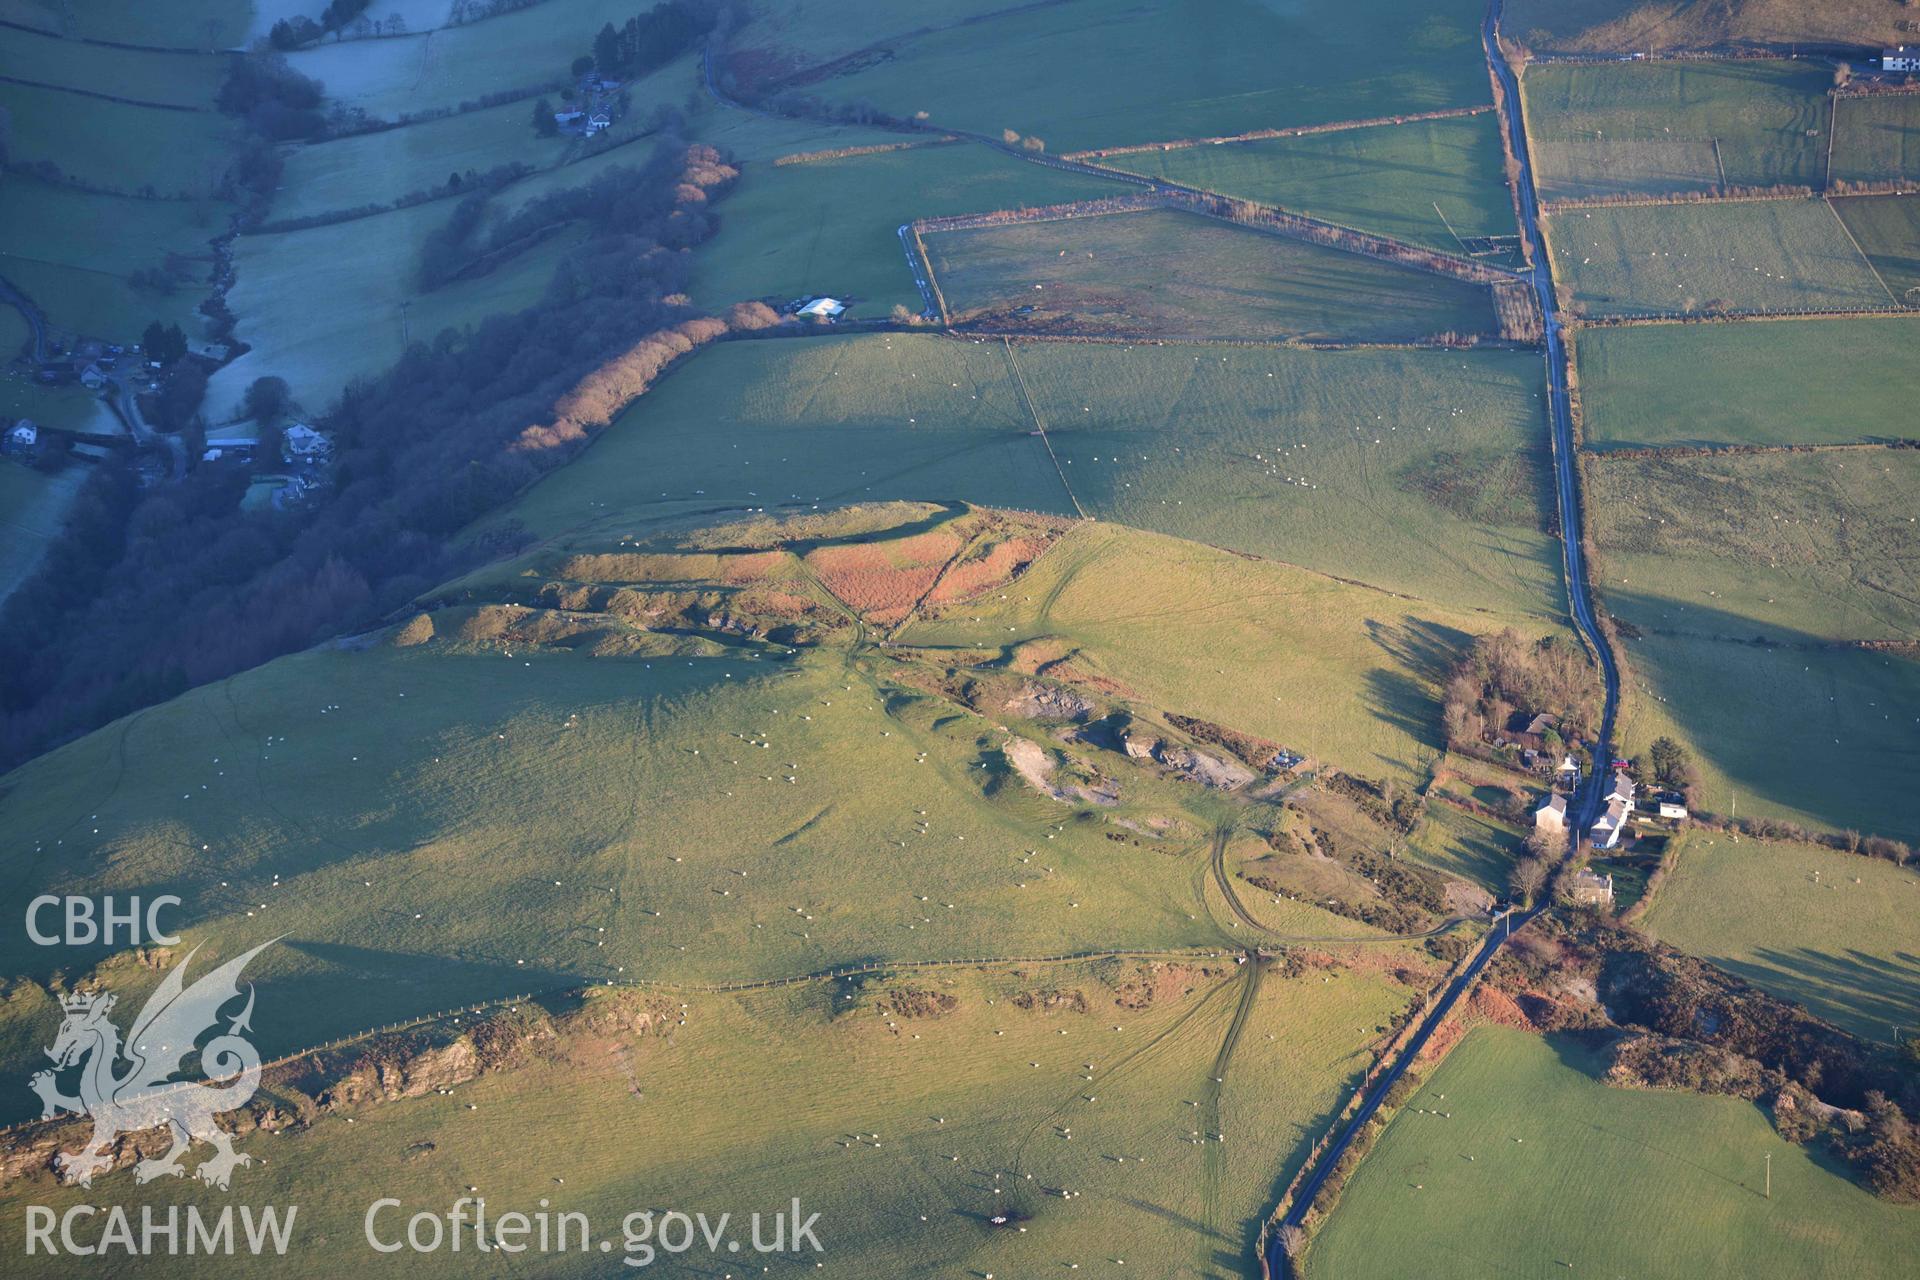 Oblique aerial photograph showing view of Darren Camp from the west. Taken during the Royal Commission’s programme of archaeological aerial reconnaissance by Toby Driver on 17th January 2022